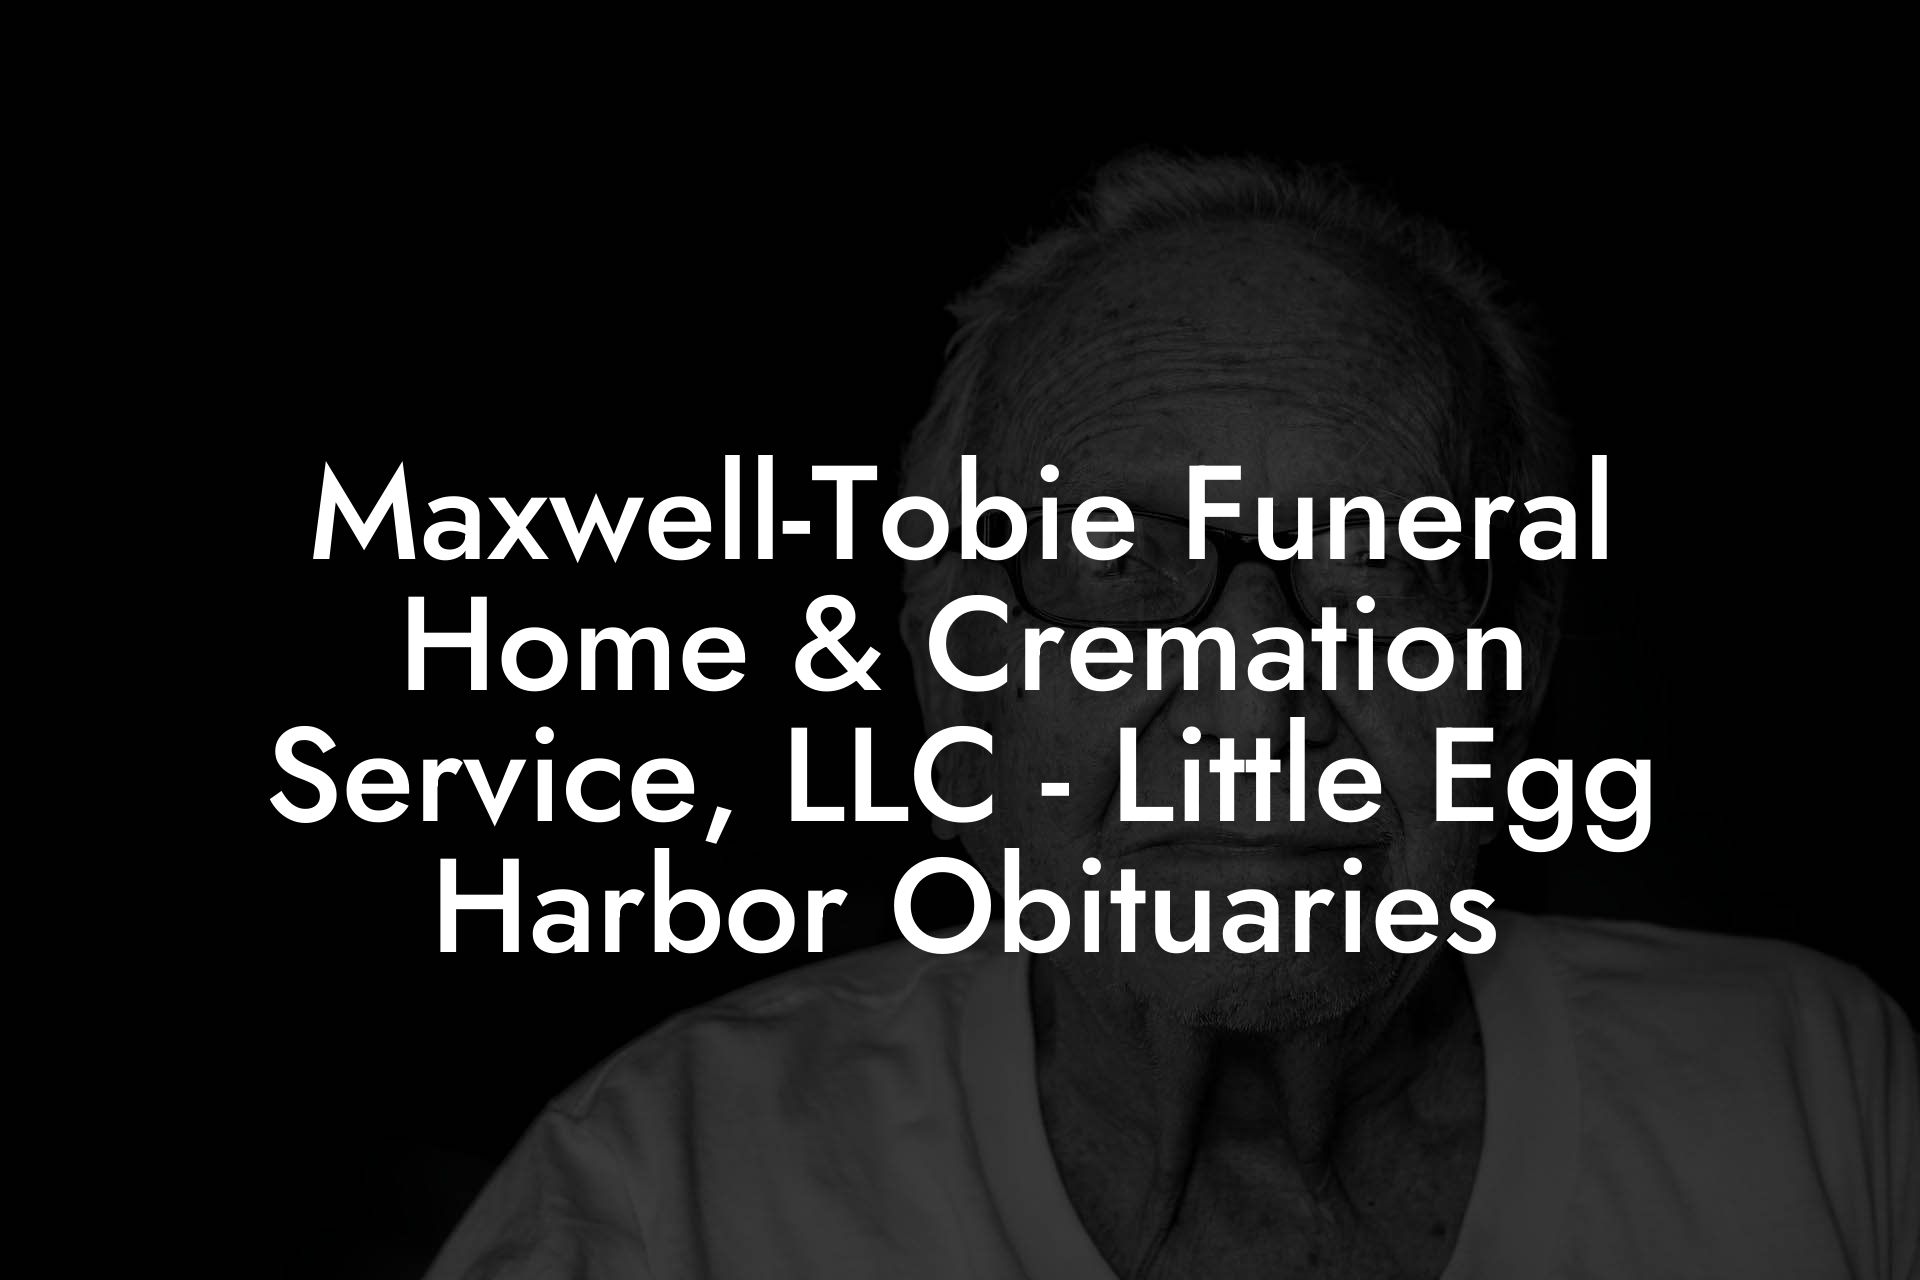 Maxwell-Tobie Funeral Home & Cremation Service, LLC - Little Egg Harbor Obituaries